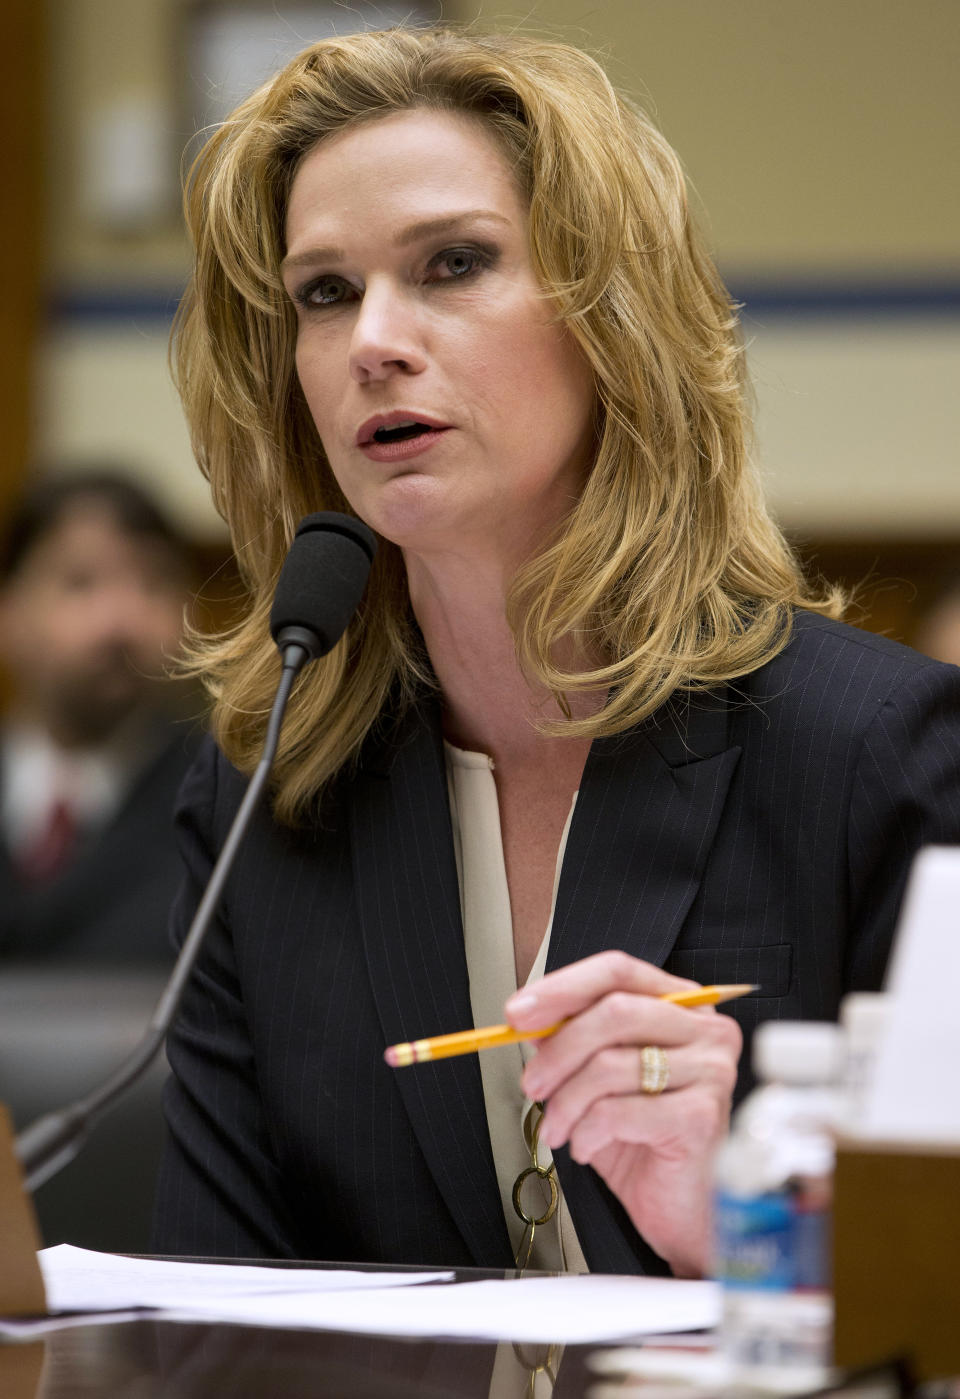 FILE - Catherine Engelbrecht, founder of King Street Patriots and True the Vote, testifies on Capitol Hill, Feb. 6, 2014, in Washington. A lawsuit that plaintiffs say could deter mass voter challenges around the country ahead of the 2024 election is headed to trial in Georgia on Thursday, Oct. 26, 2023. A group associated with Democrat Stacey Abrams accuses Texas-based True the Vote of trying to intimidate voters ahead of a 2021 Senate runoff election in Georgia. (AP Photo/Pablo Martinez Monsivais, File)